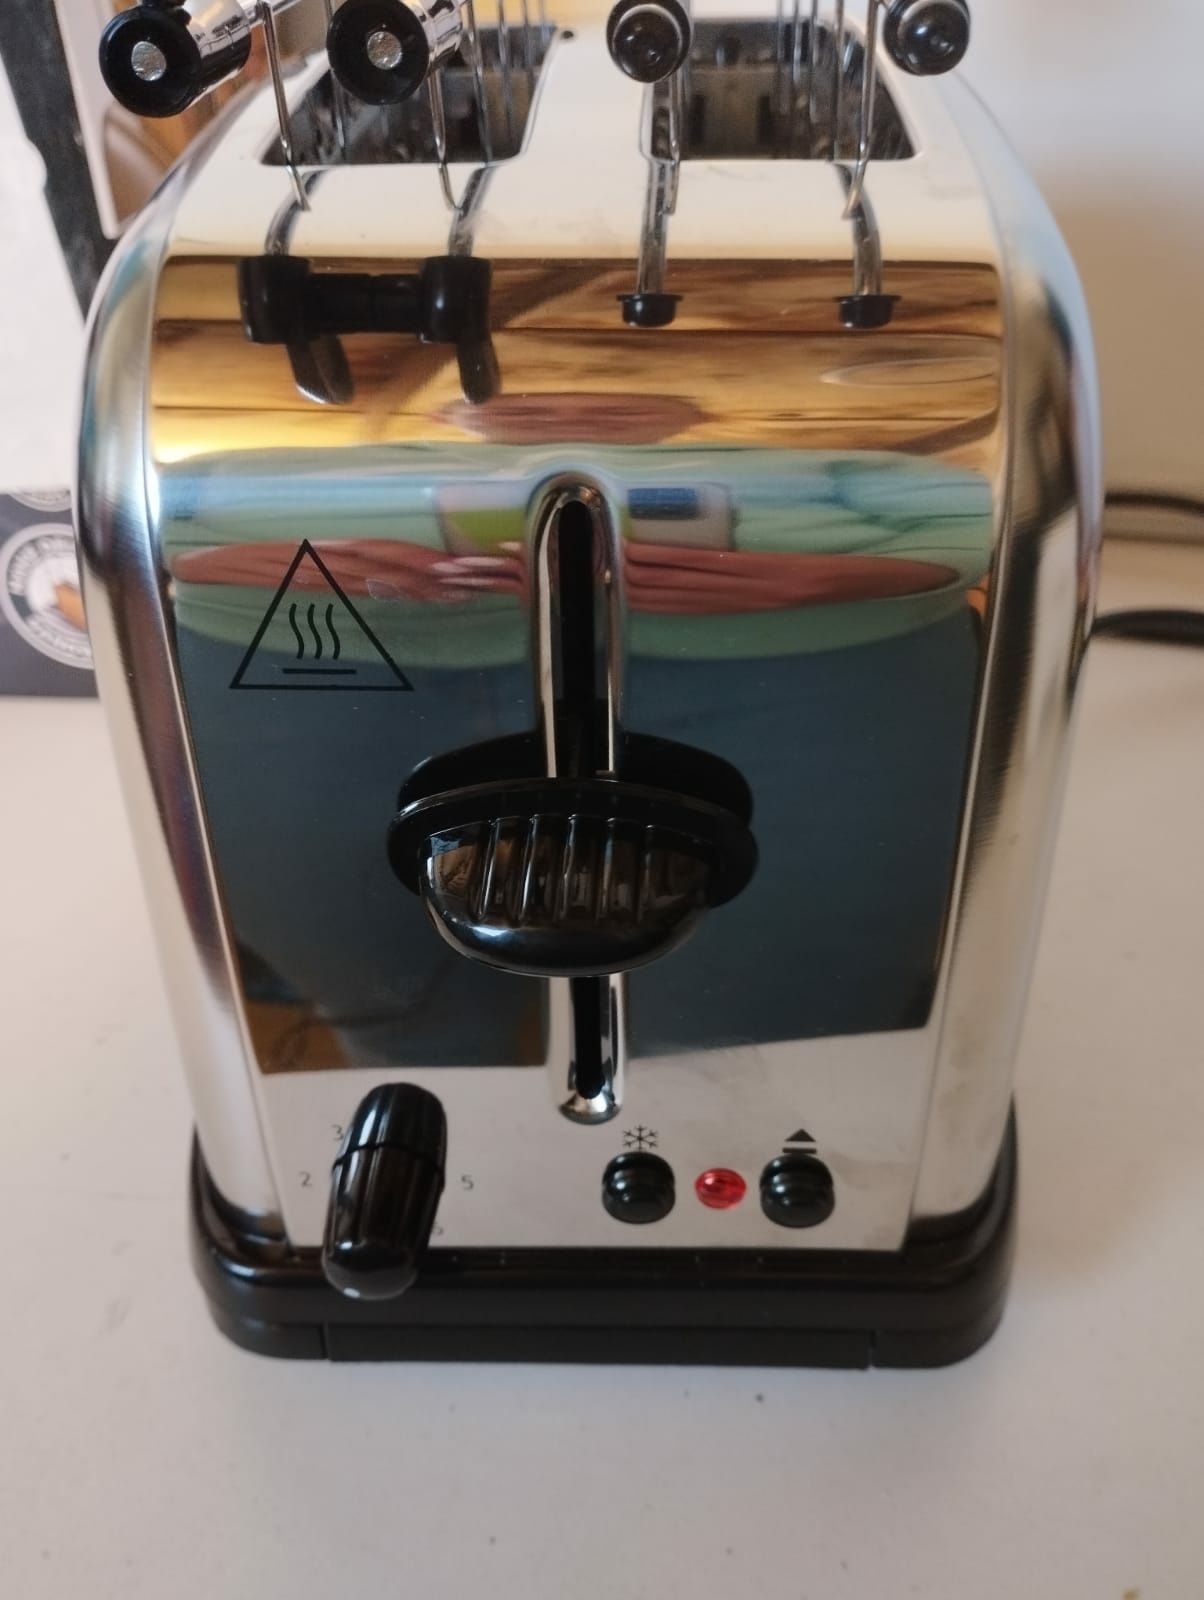 Toster Russell Hobbs